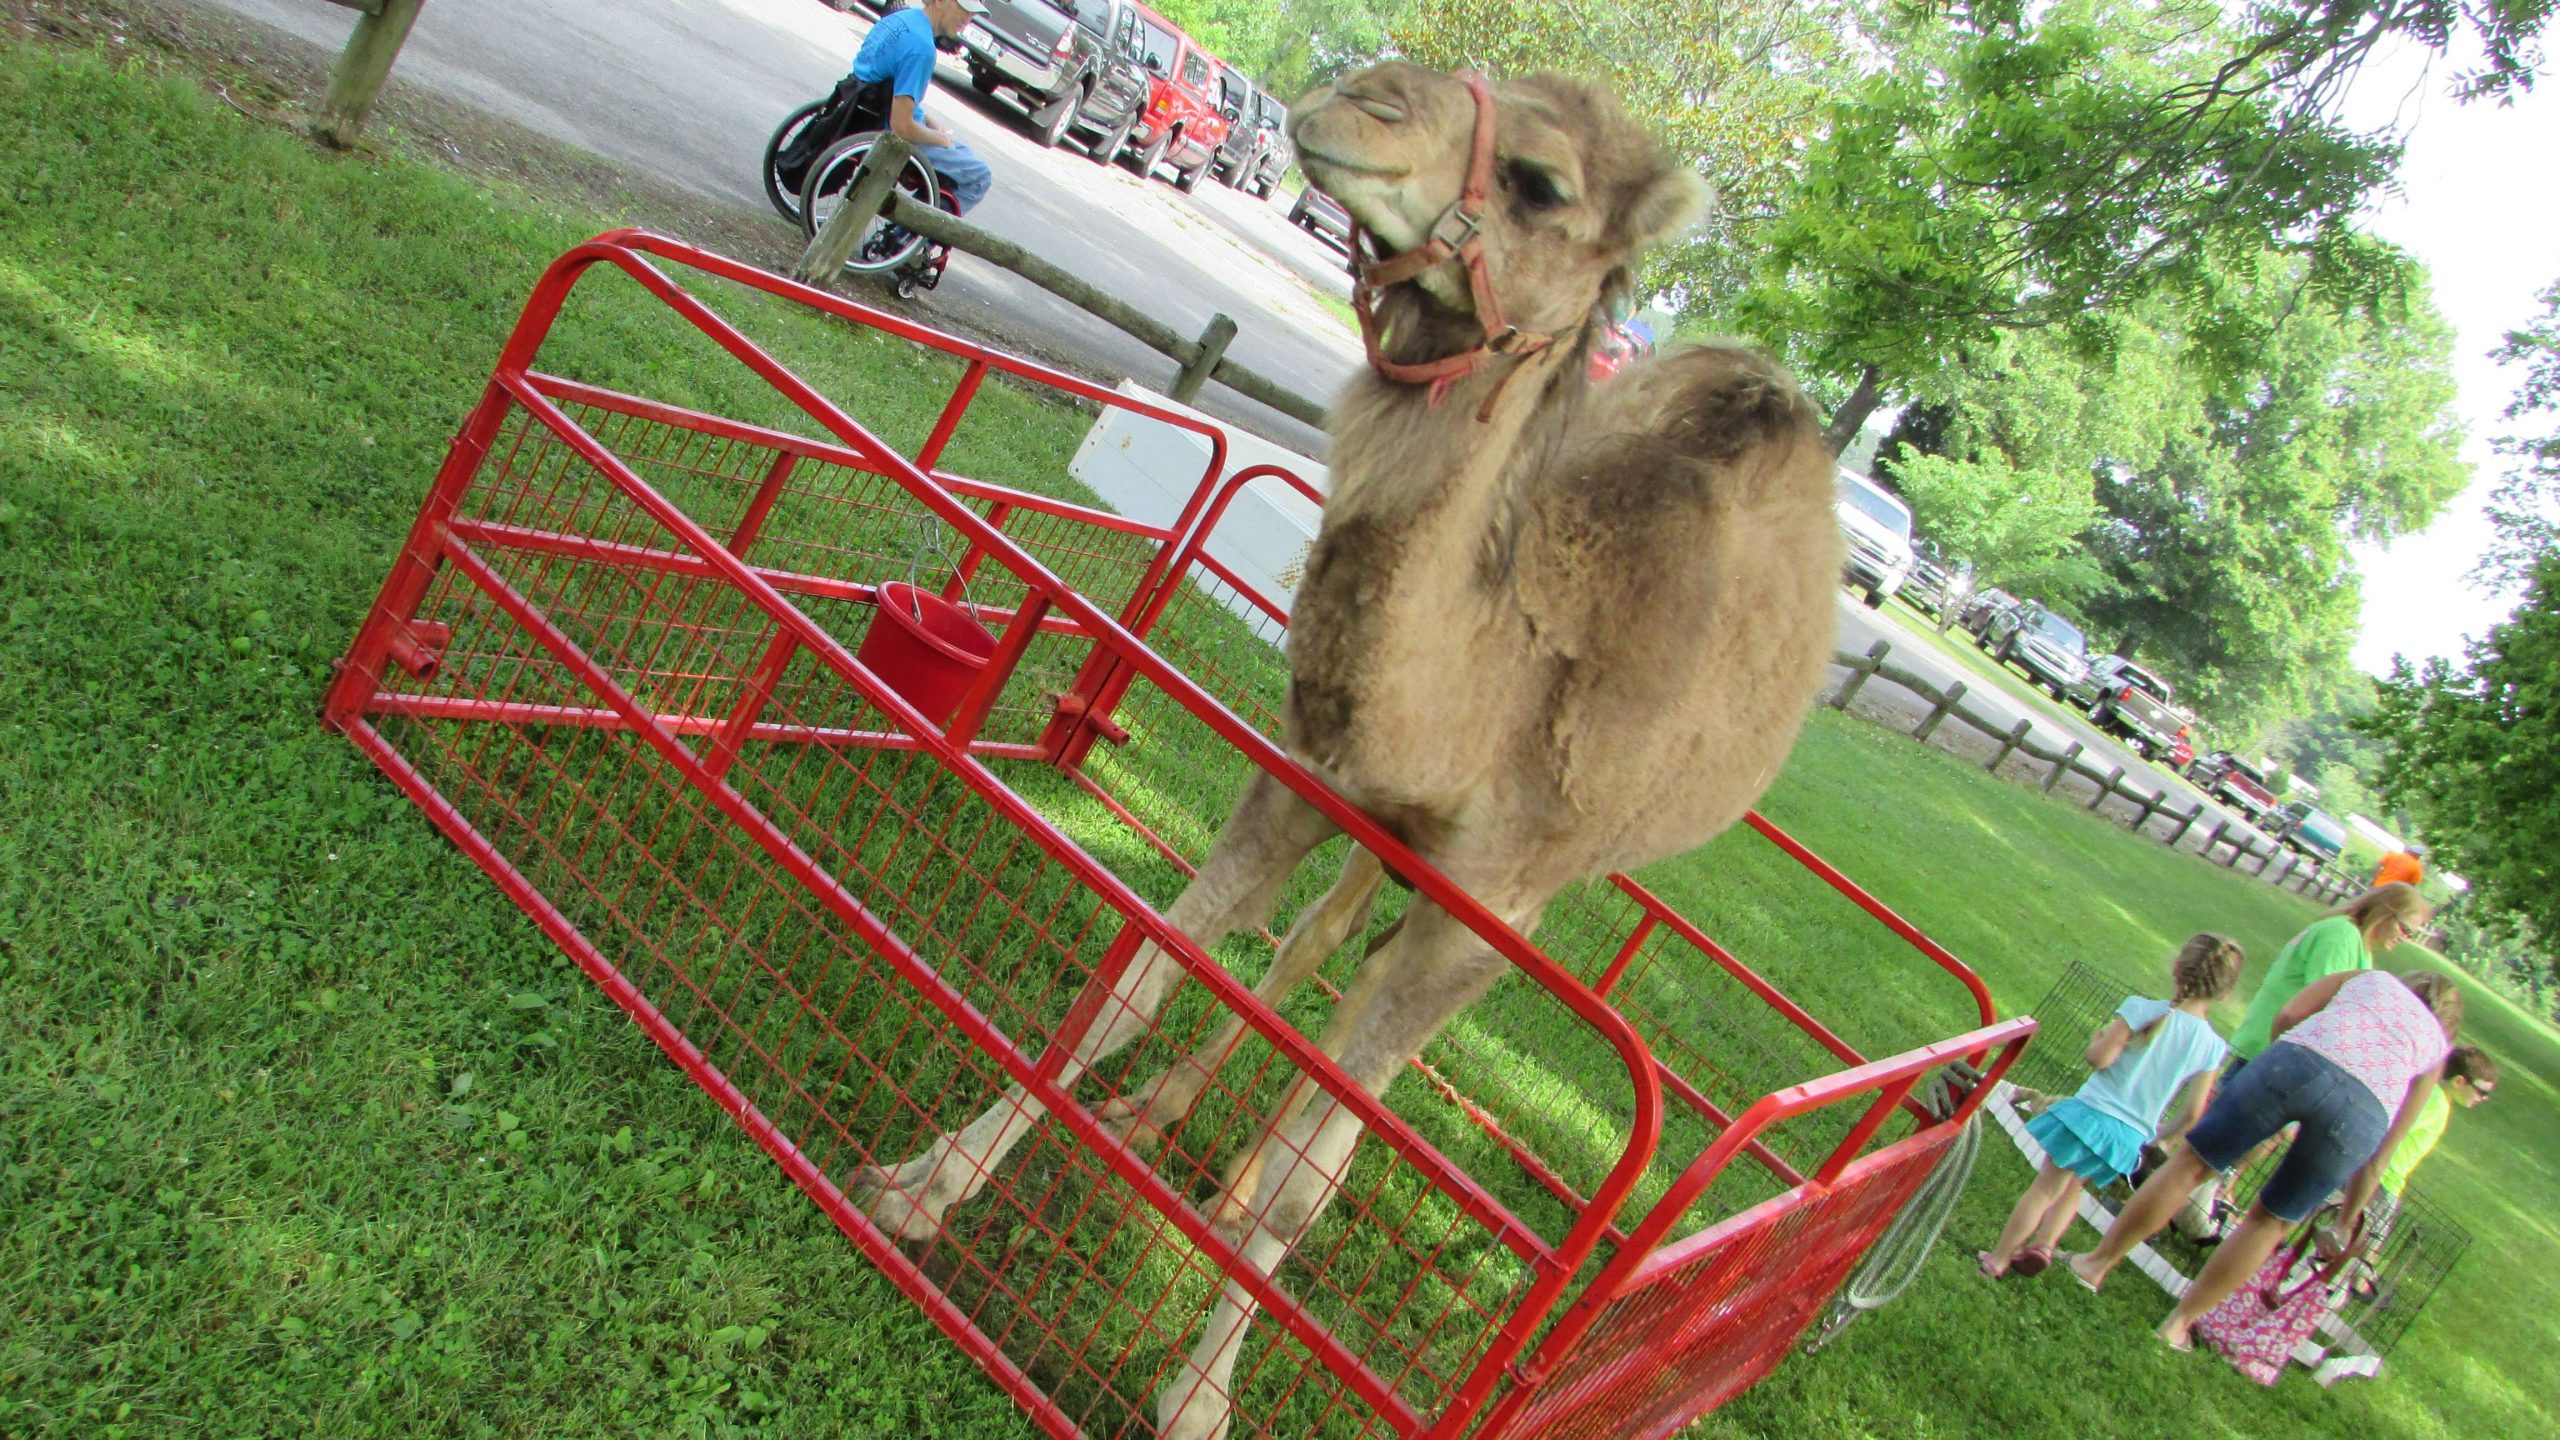 ...and a friendly camel.